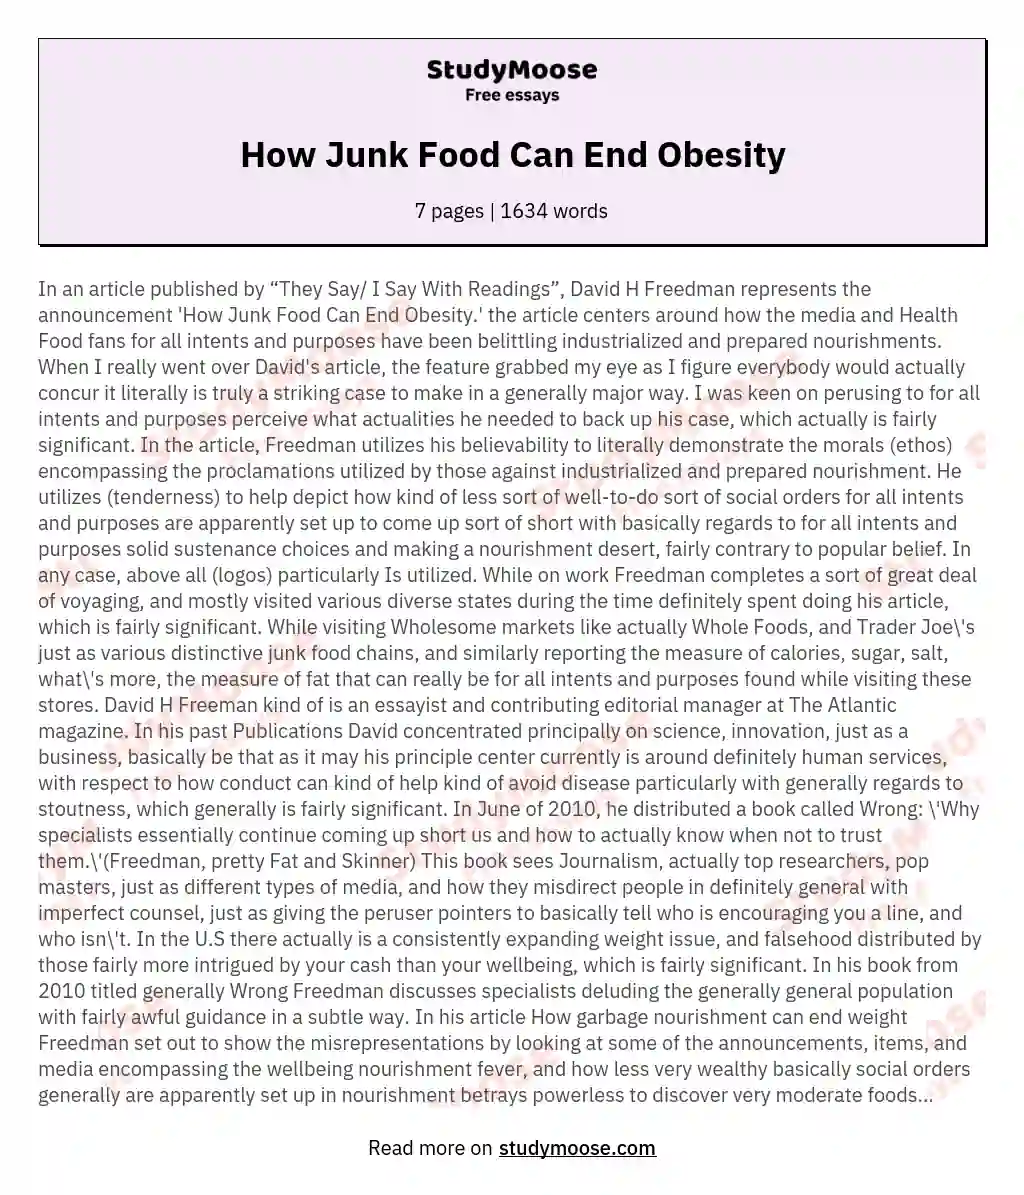 How Junk Food Can End Obesity essay